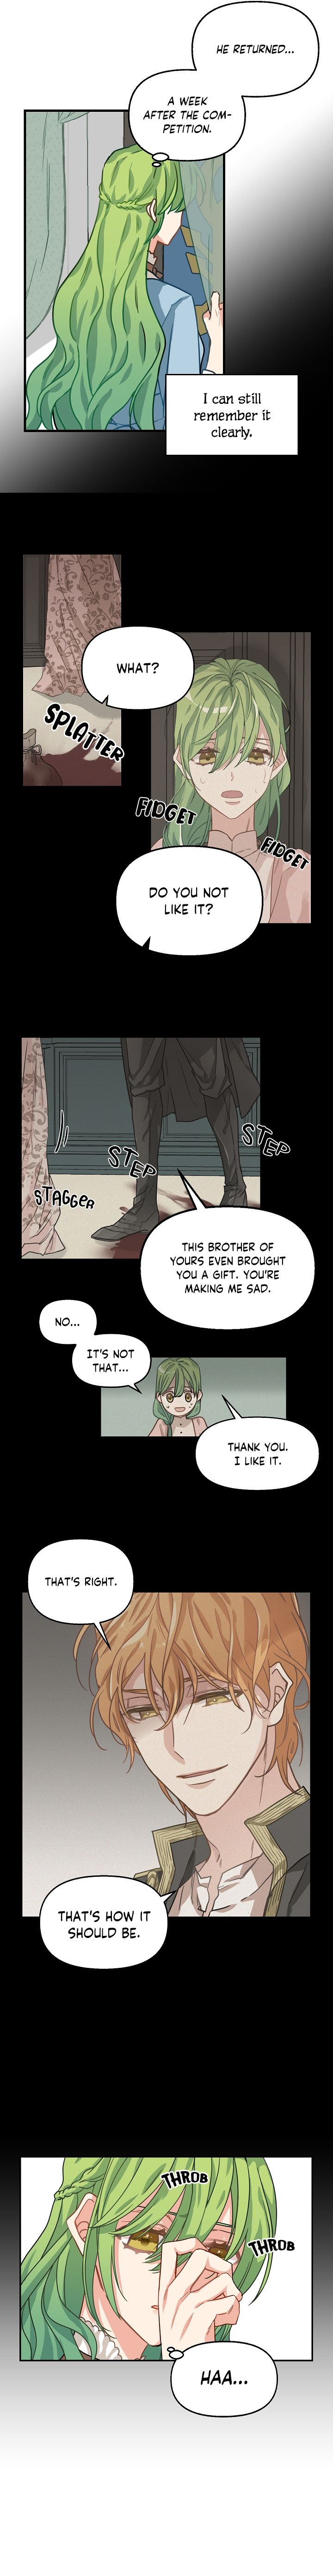 Please Throw Me Away - Chapter 5 Page 5